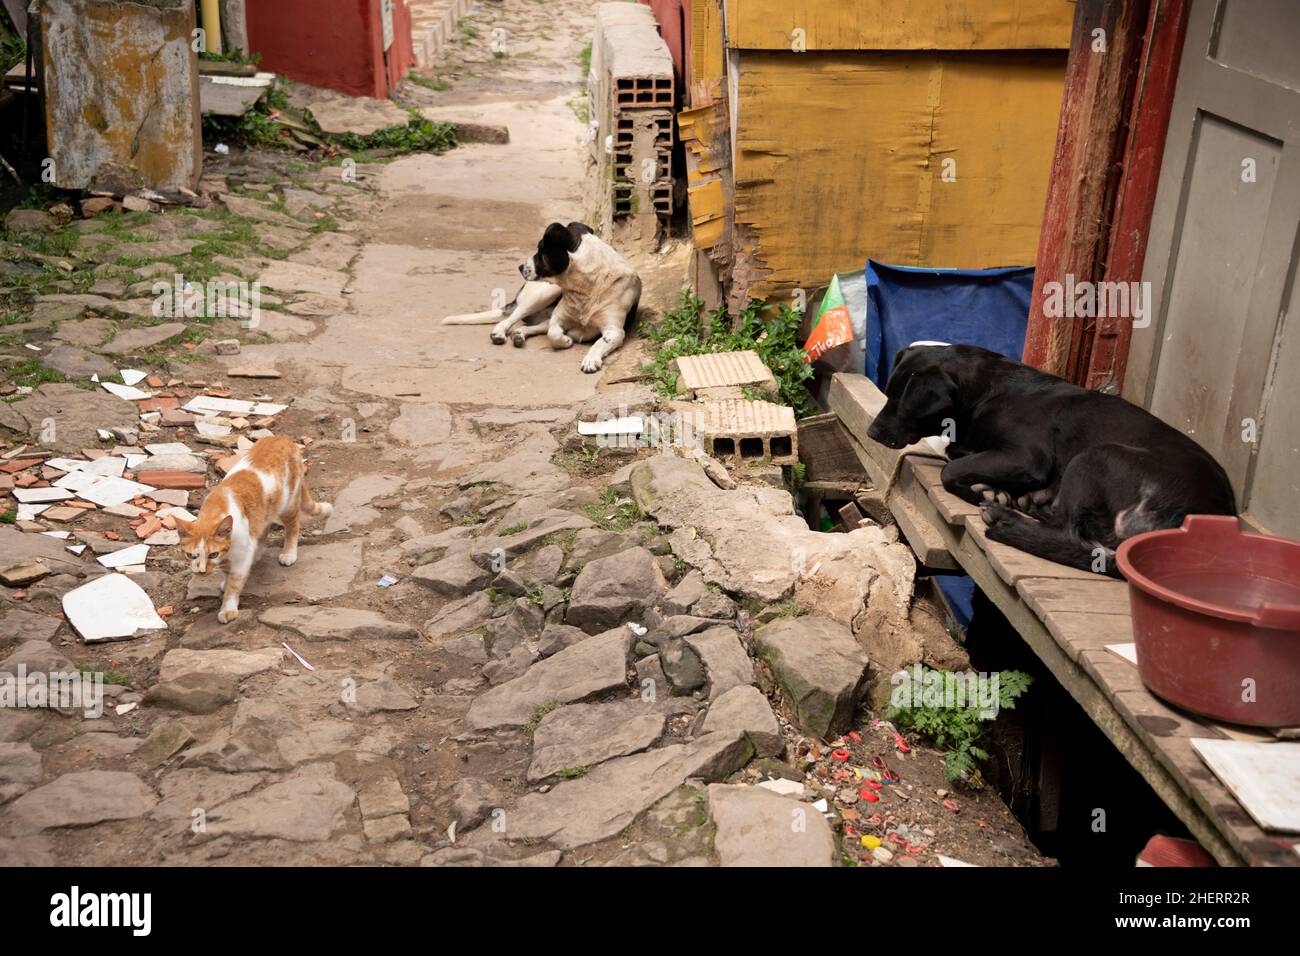 Two dogs and cat on a alleyway in deprived shanty town shacks, in notorious gang Barrio Egipto neighborhood, Bogota, Colombia, South America. Stock Photo